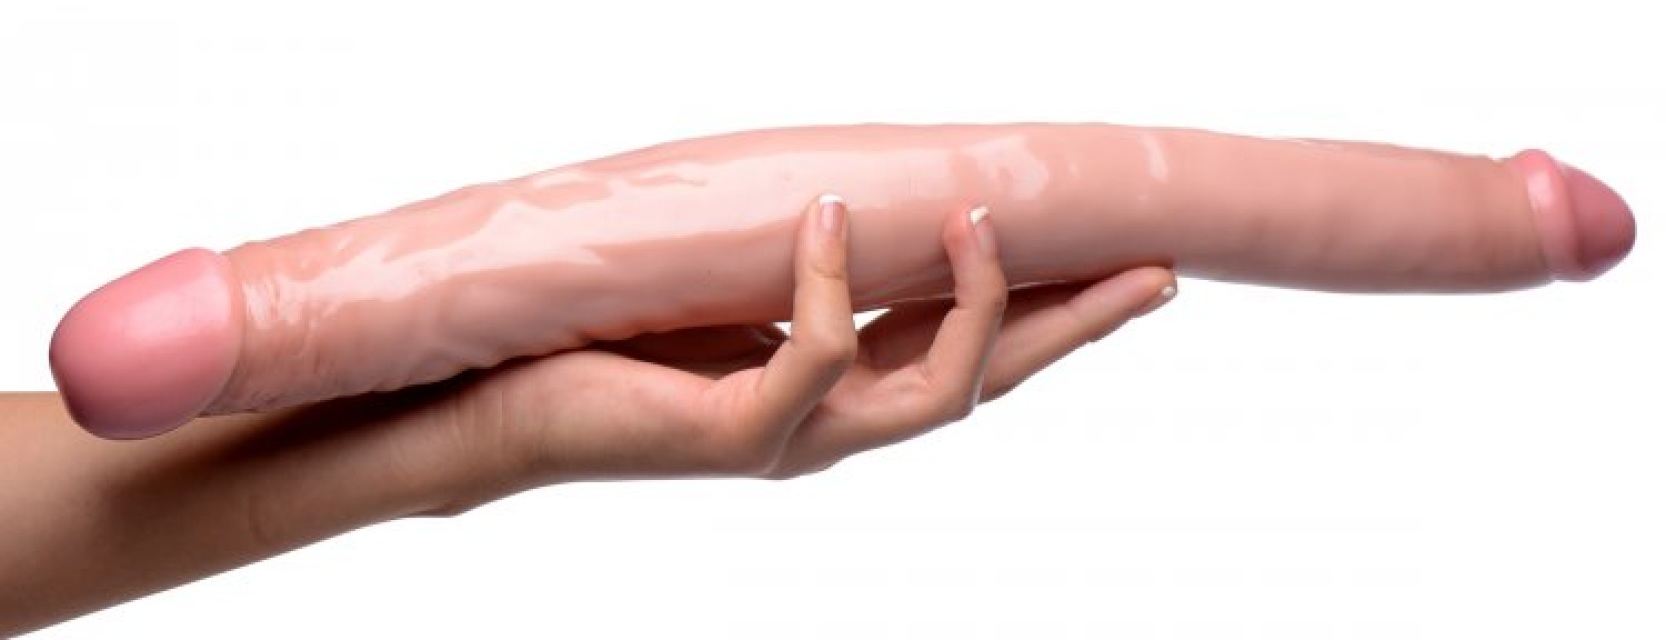 SexFlesh Realistic 16 inch Double Dong Sex Flesh Big White Cock BWC Dildo Life Like LARGE FREE USA SHIPPING AF204-Large picture